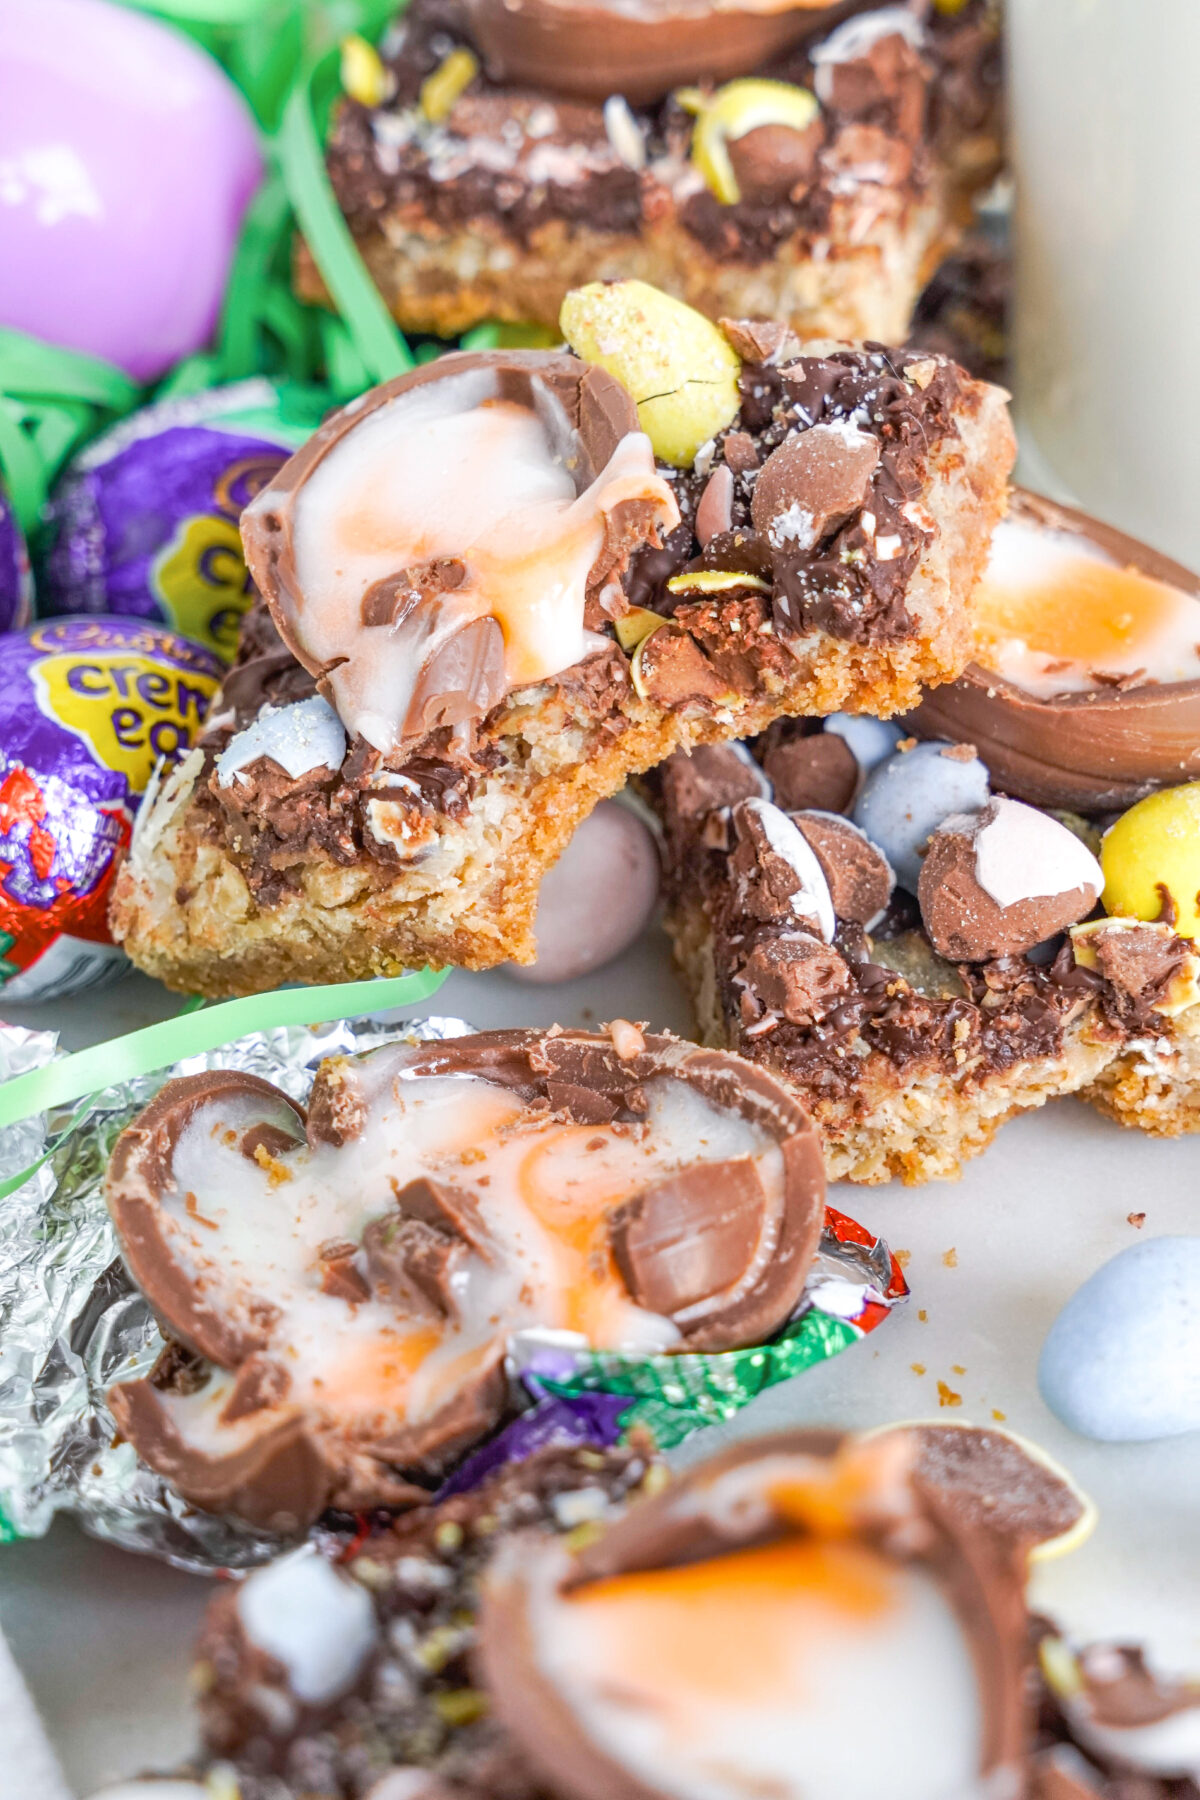 Celebrate Easter with these easy-to-make Magic Cookie Bars. These sweet, chewy bars are loaded with mini eggs, creme eggs and more!